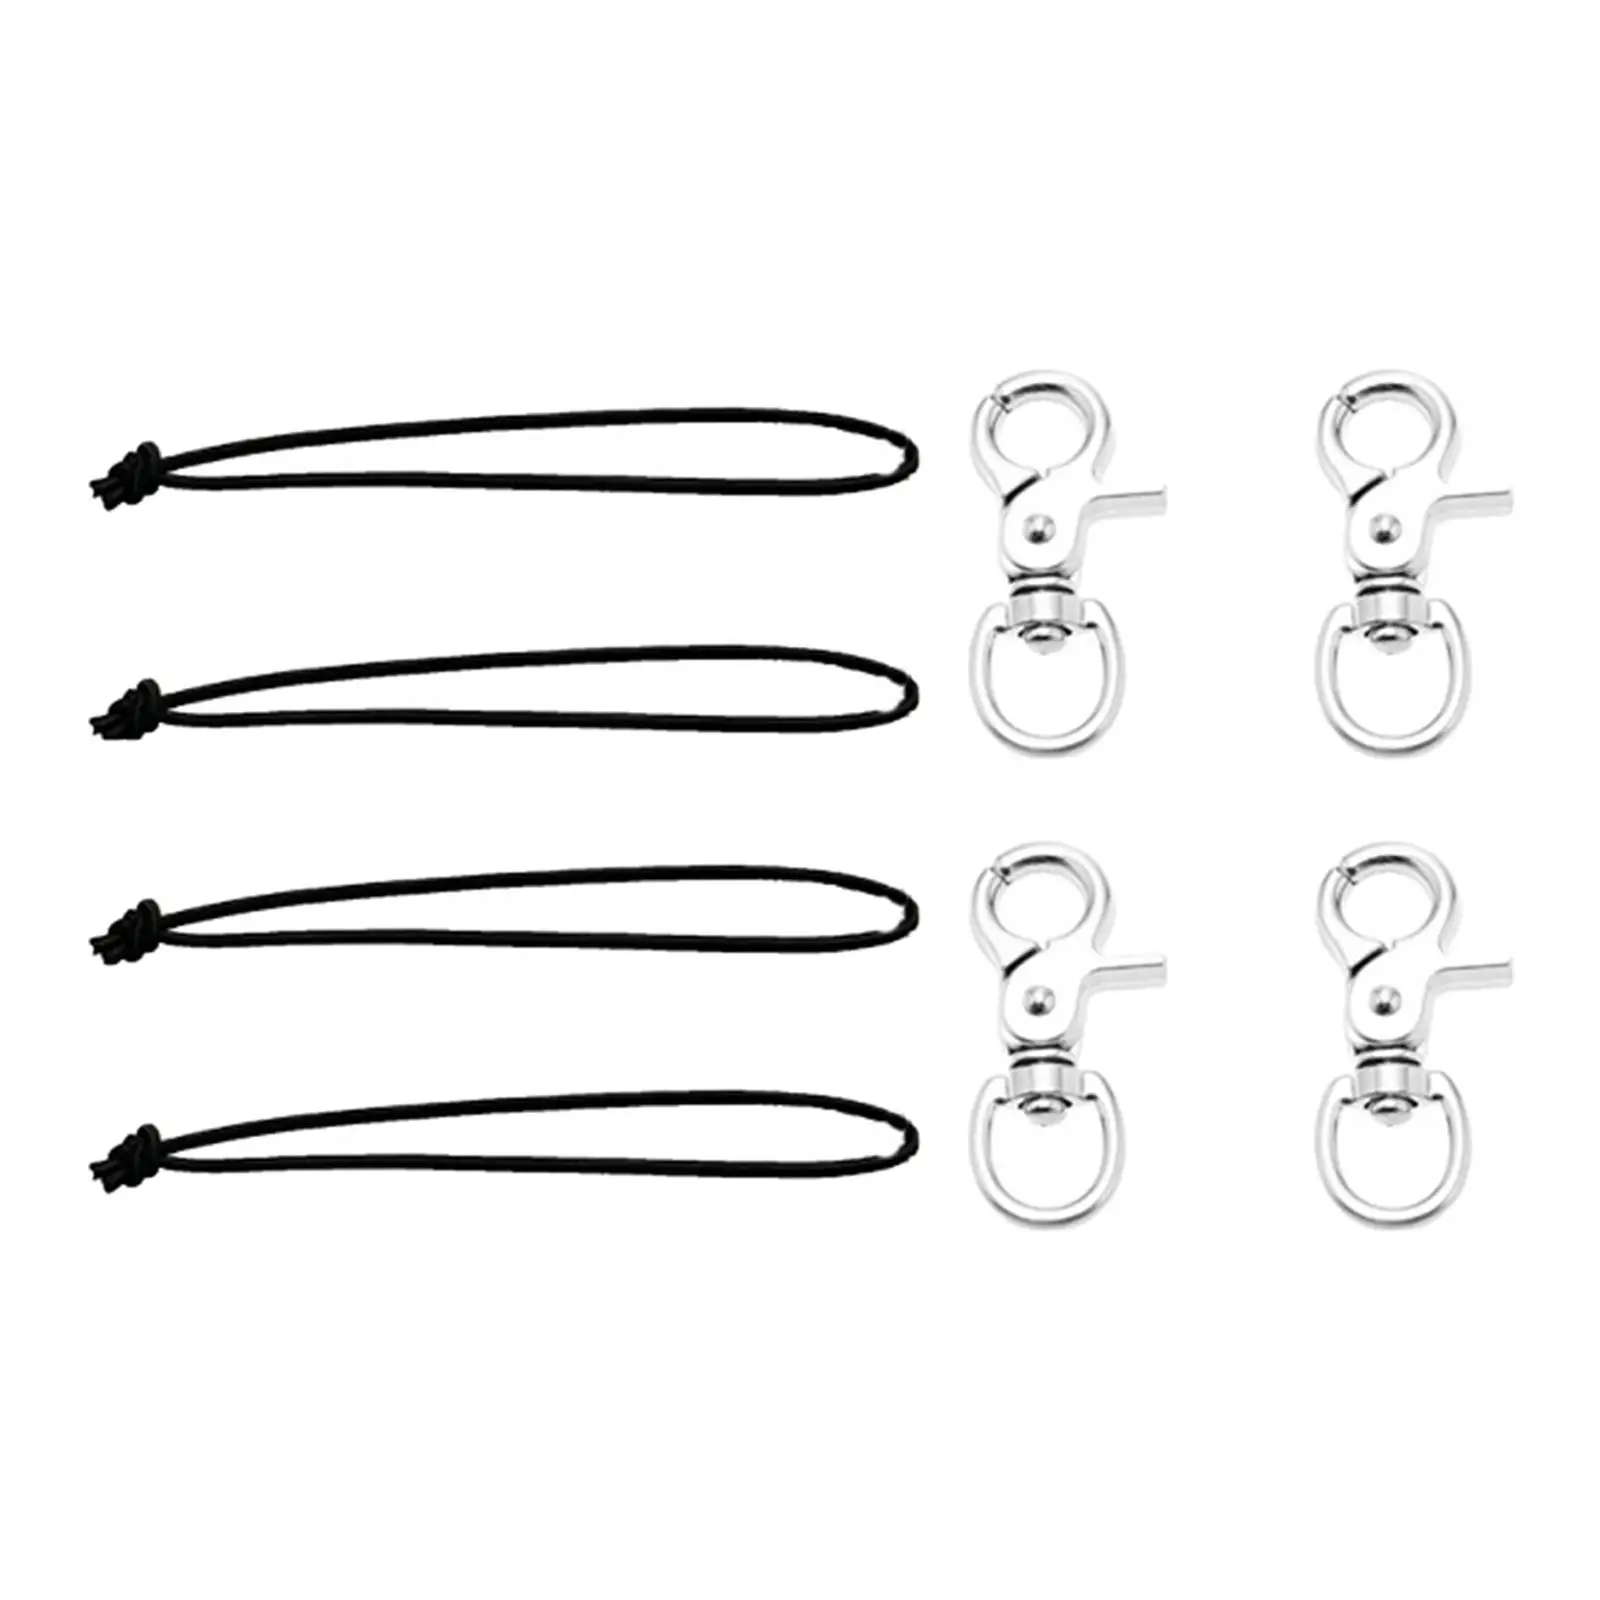 4Pcs Elastic Snowboard Leash Cord Accessories, Replacement, with Clip, Useful